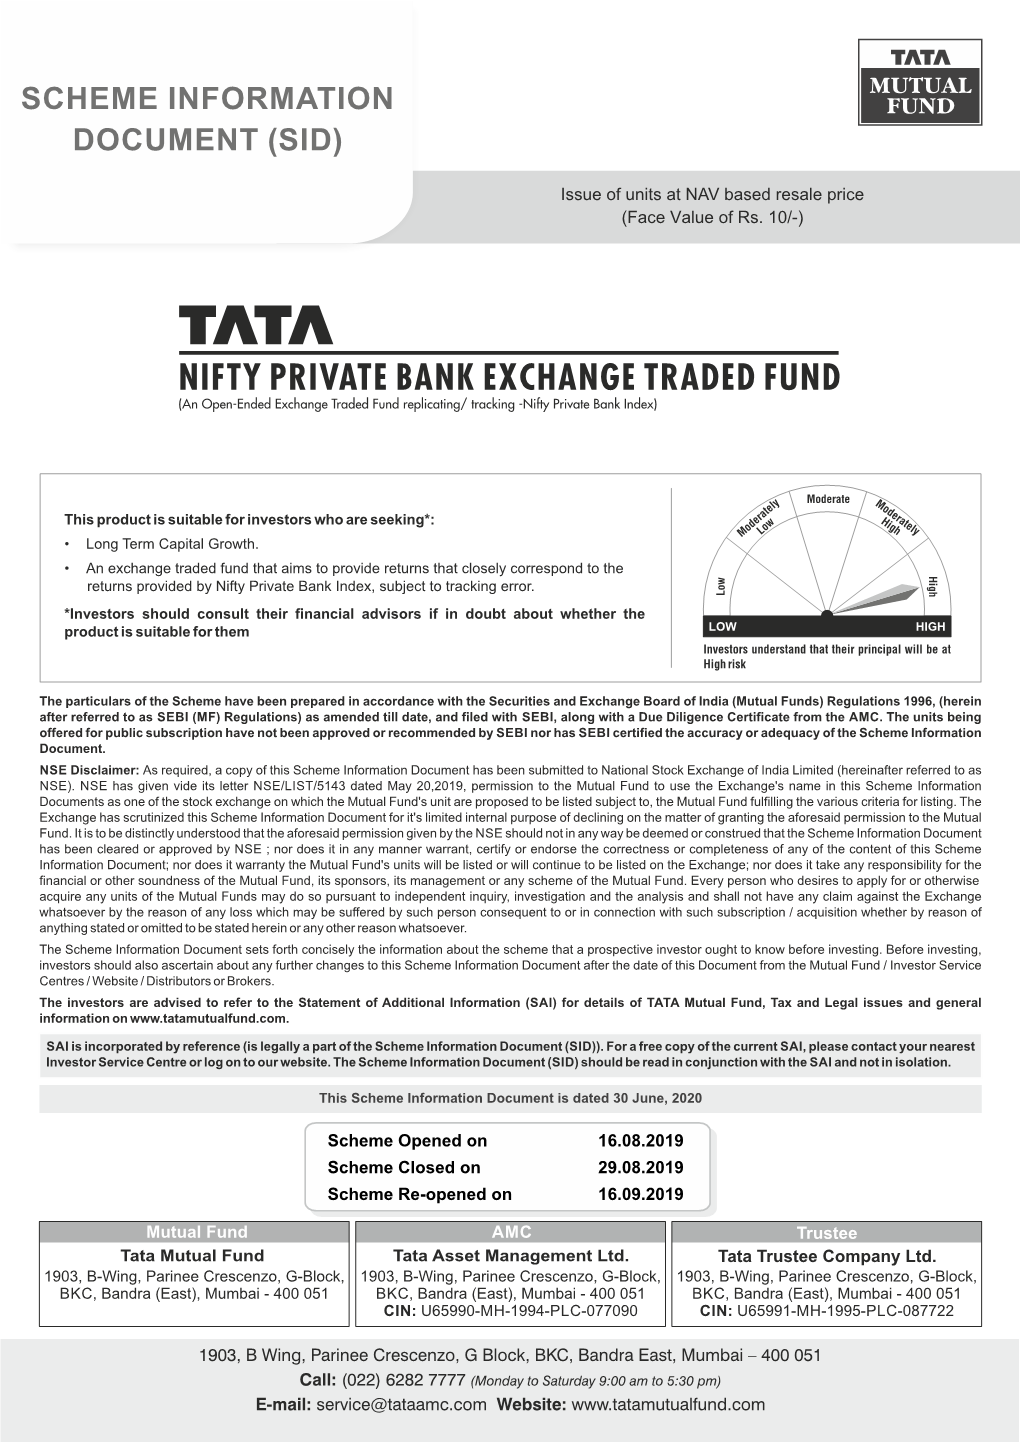 NIFTY PRIVATE BANK EXCHANGE TRADED FUND (An Open-Ended Exchange Traded Fund Replicating/ Tracking -Nifty Private Bank Index)